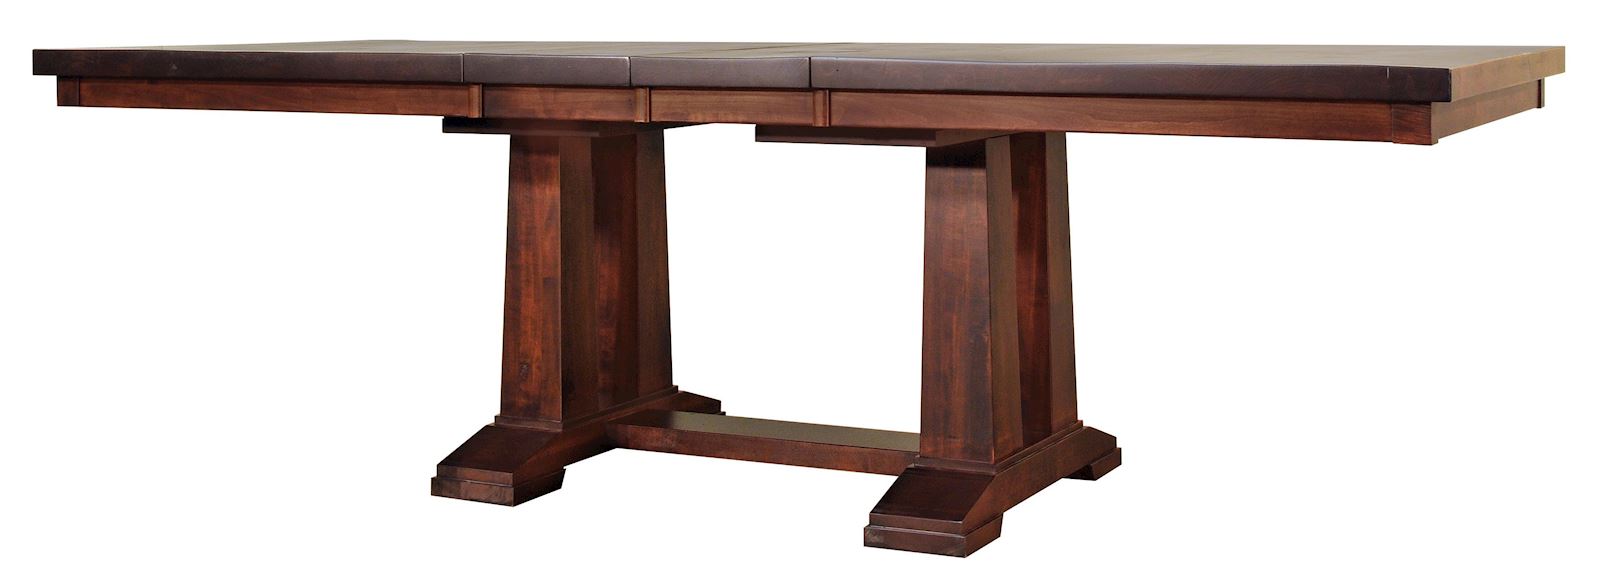 ruff-sawn-athens-dining-table